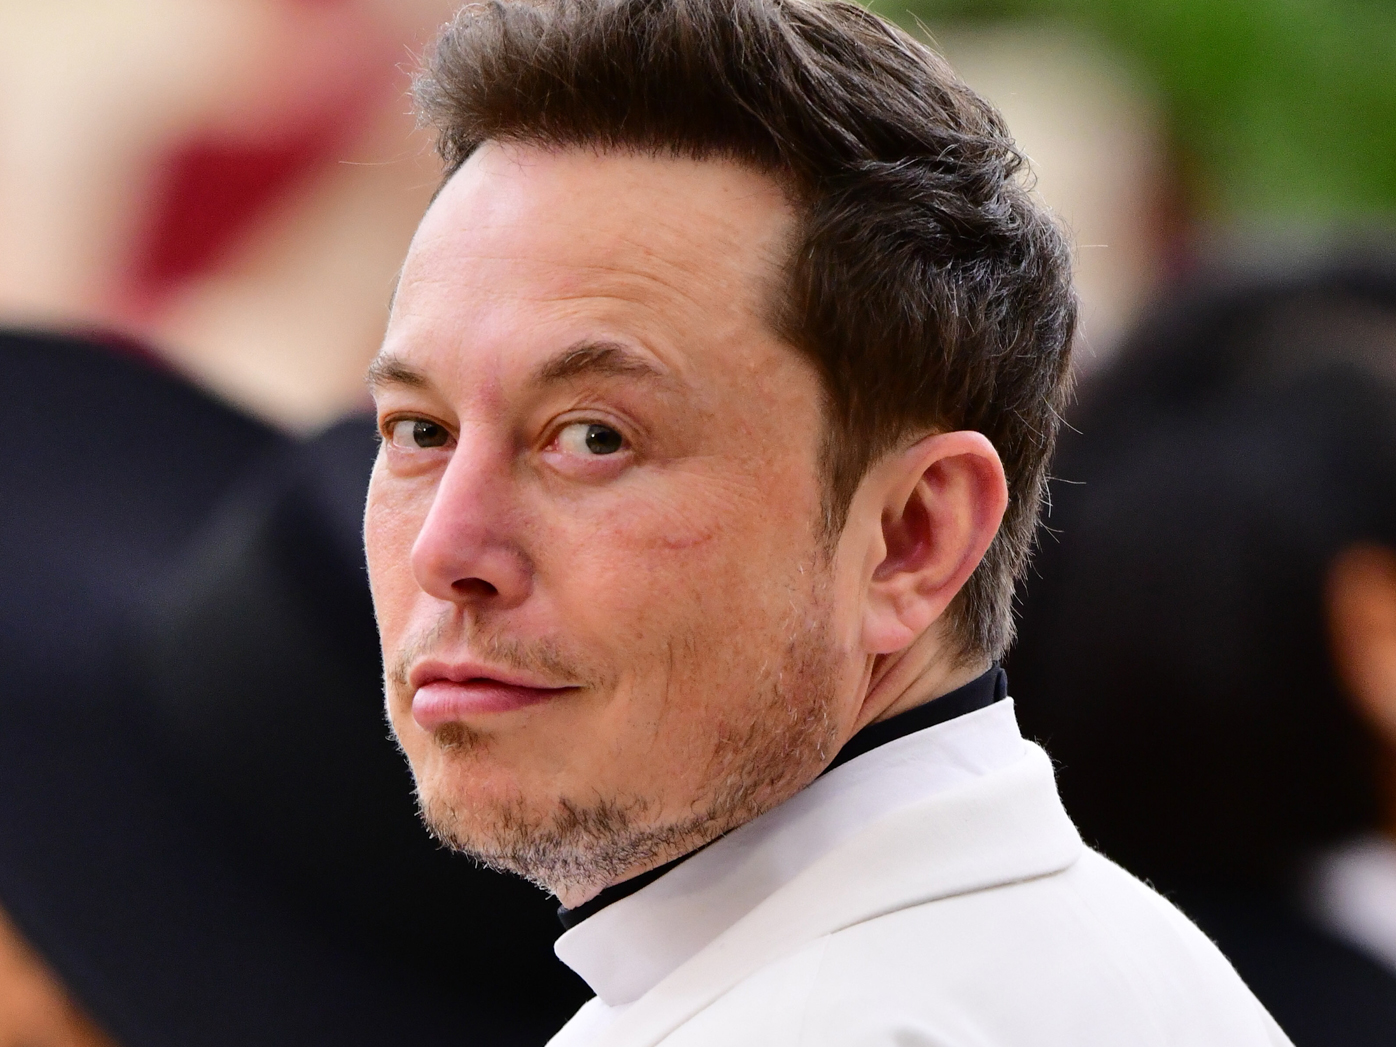 Elon Musk called for nuclear weapons to be fired at Mars to make it  habitable for humans